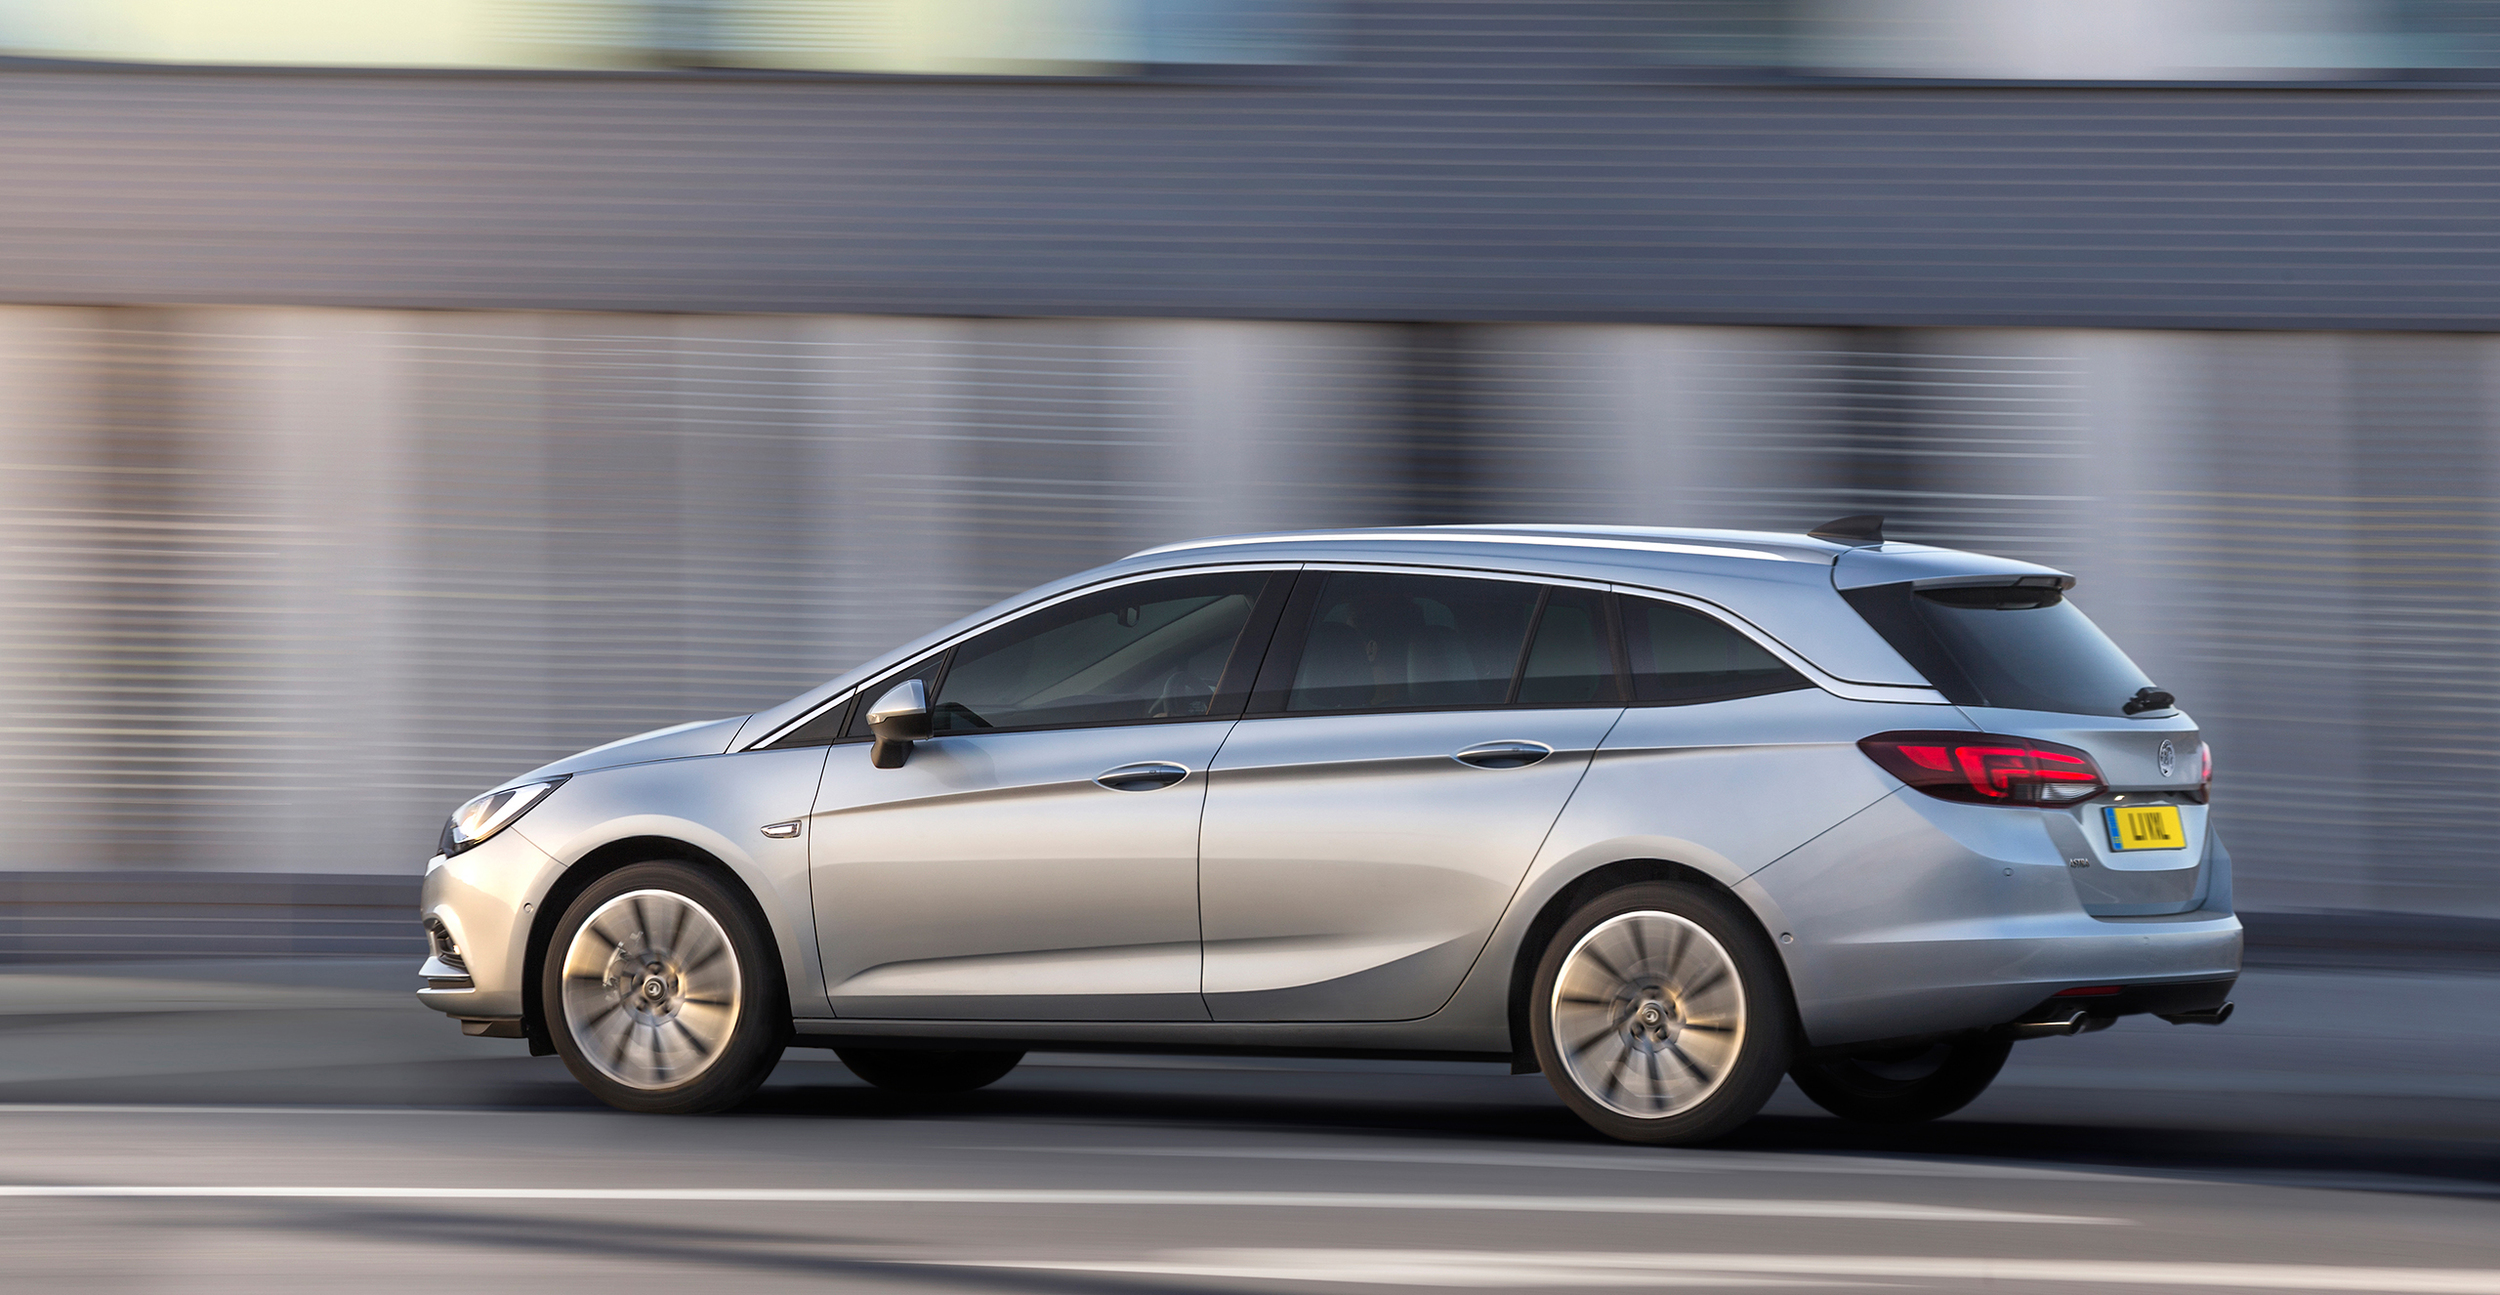 Vauxhall confirms pricing for new Astra Sports Tourer